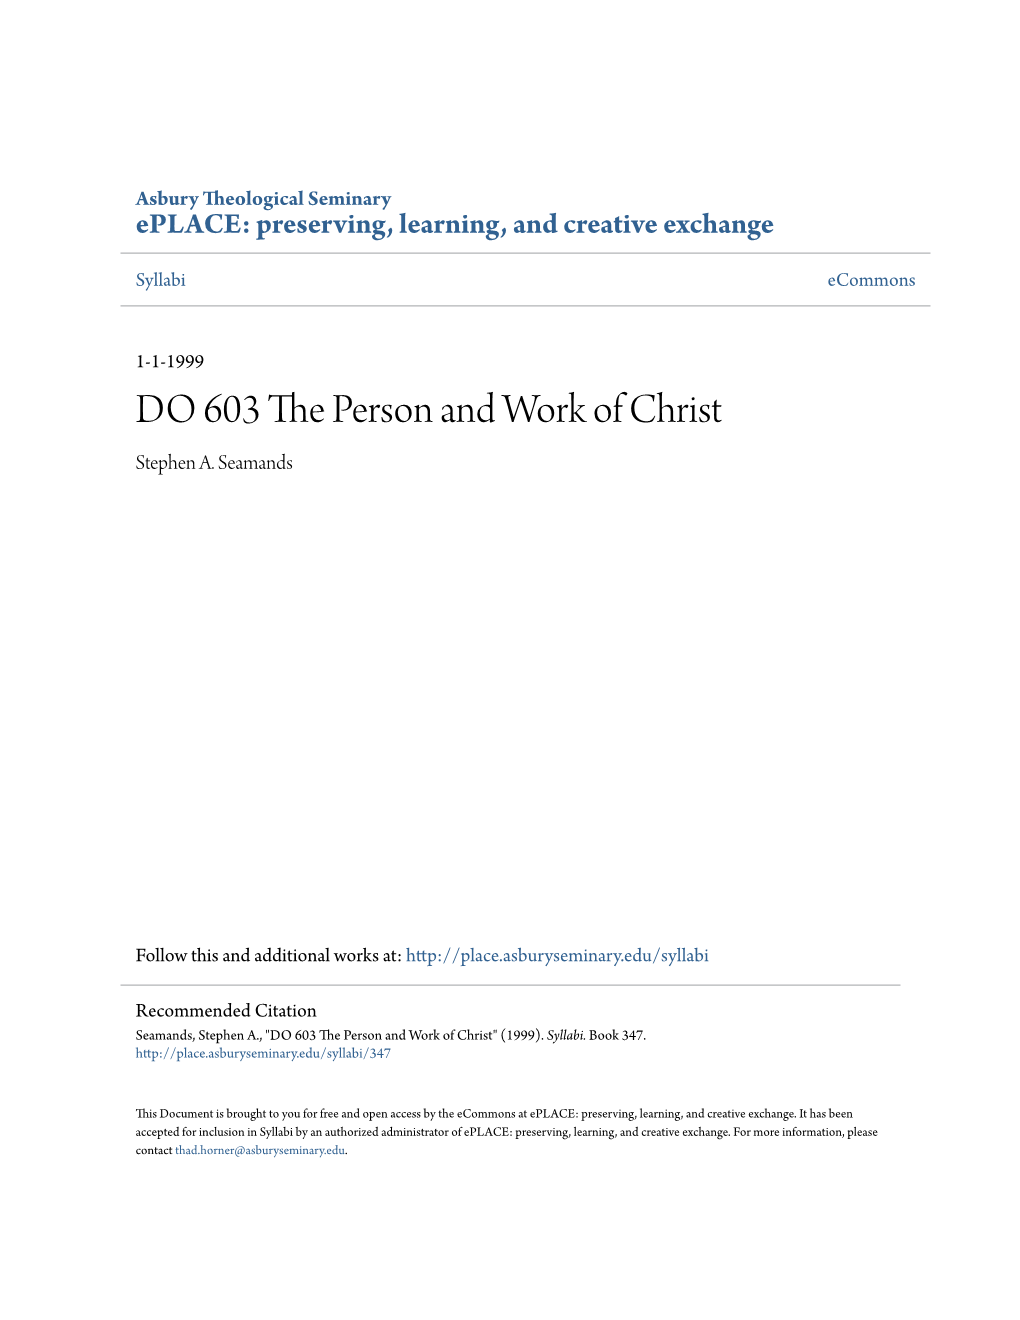 DO 603 the Person and Work of Christ